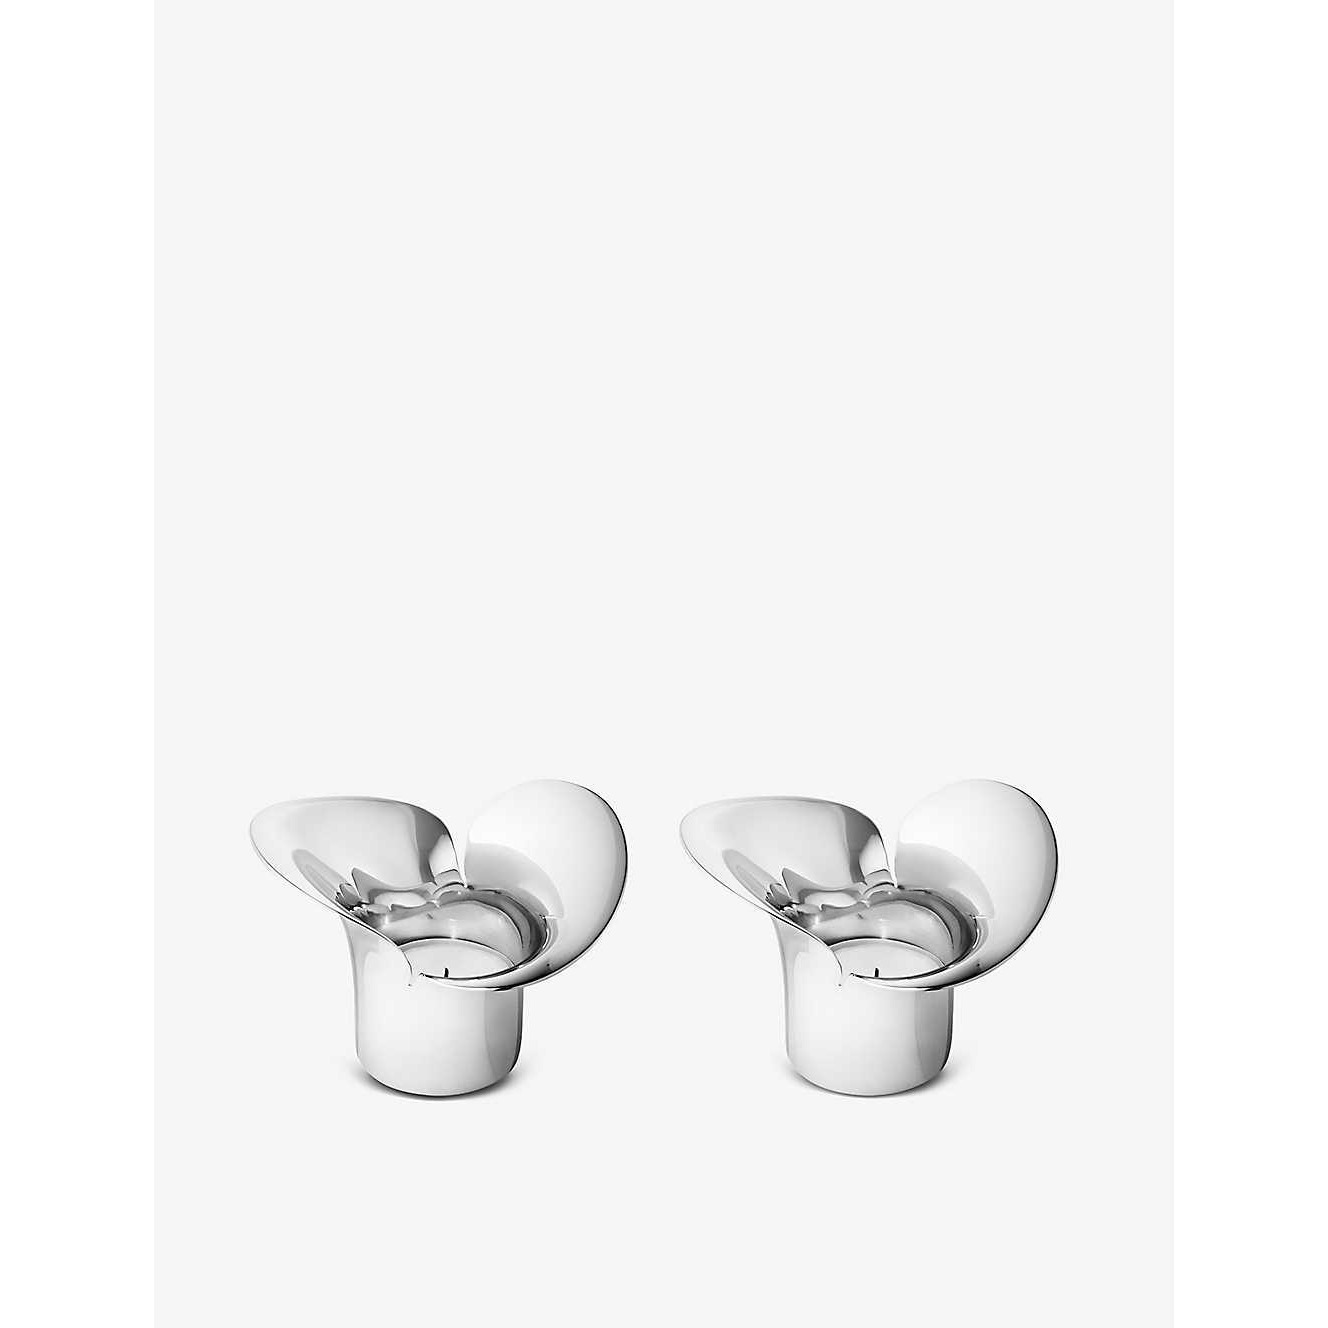 Bloom Botanica polished stainless-steel tealight holders pack of two